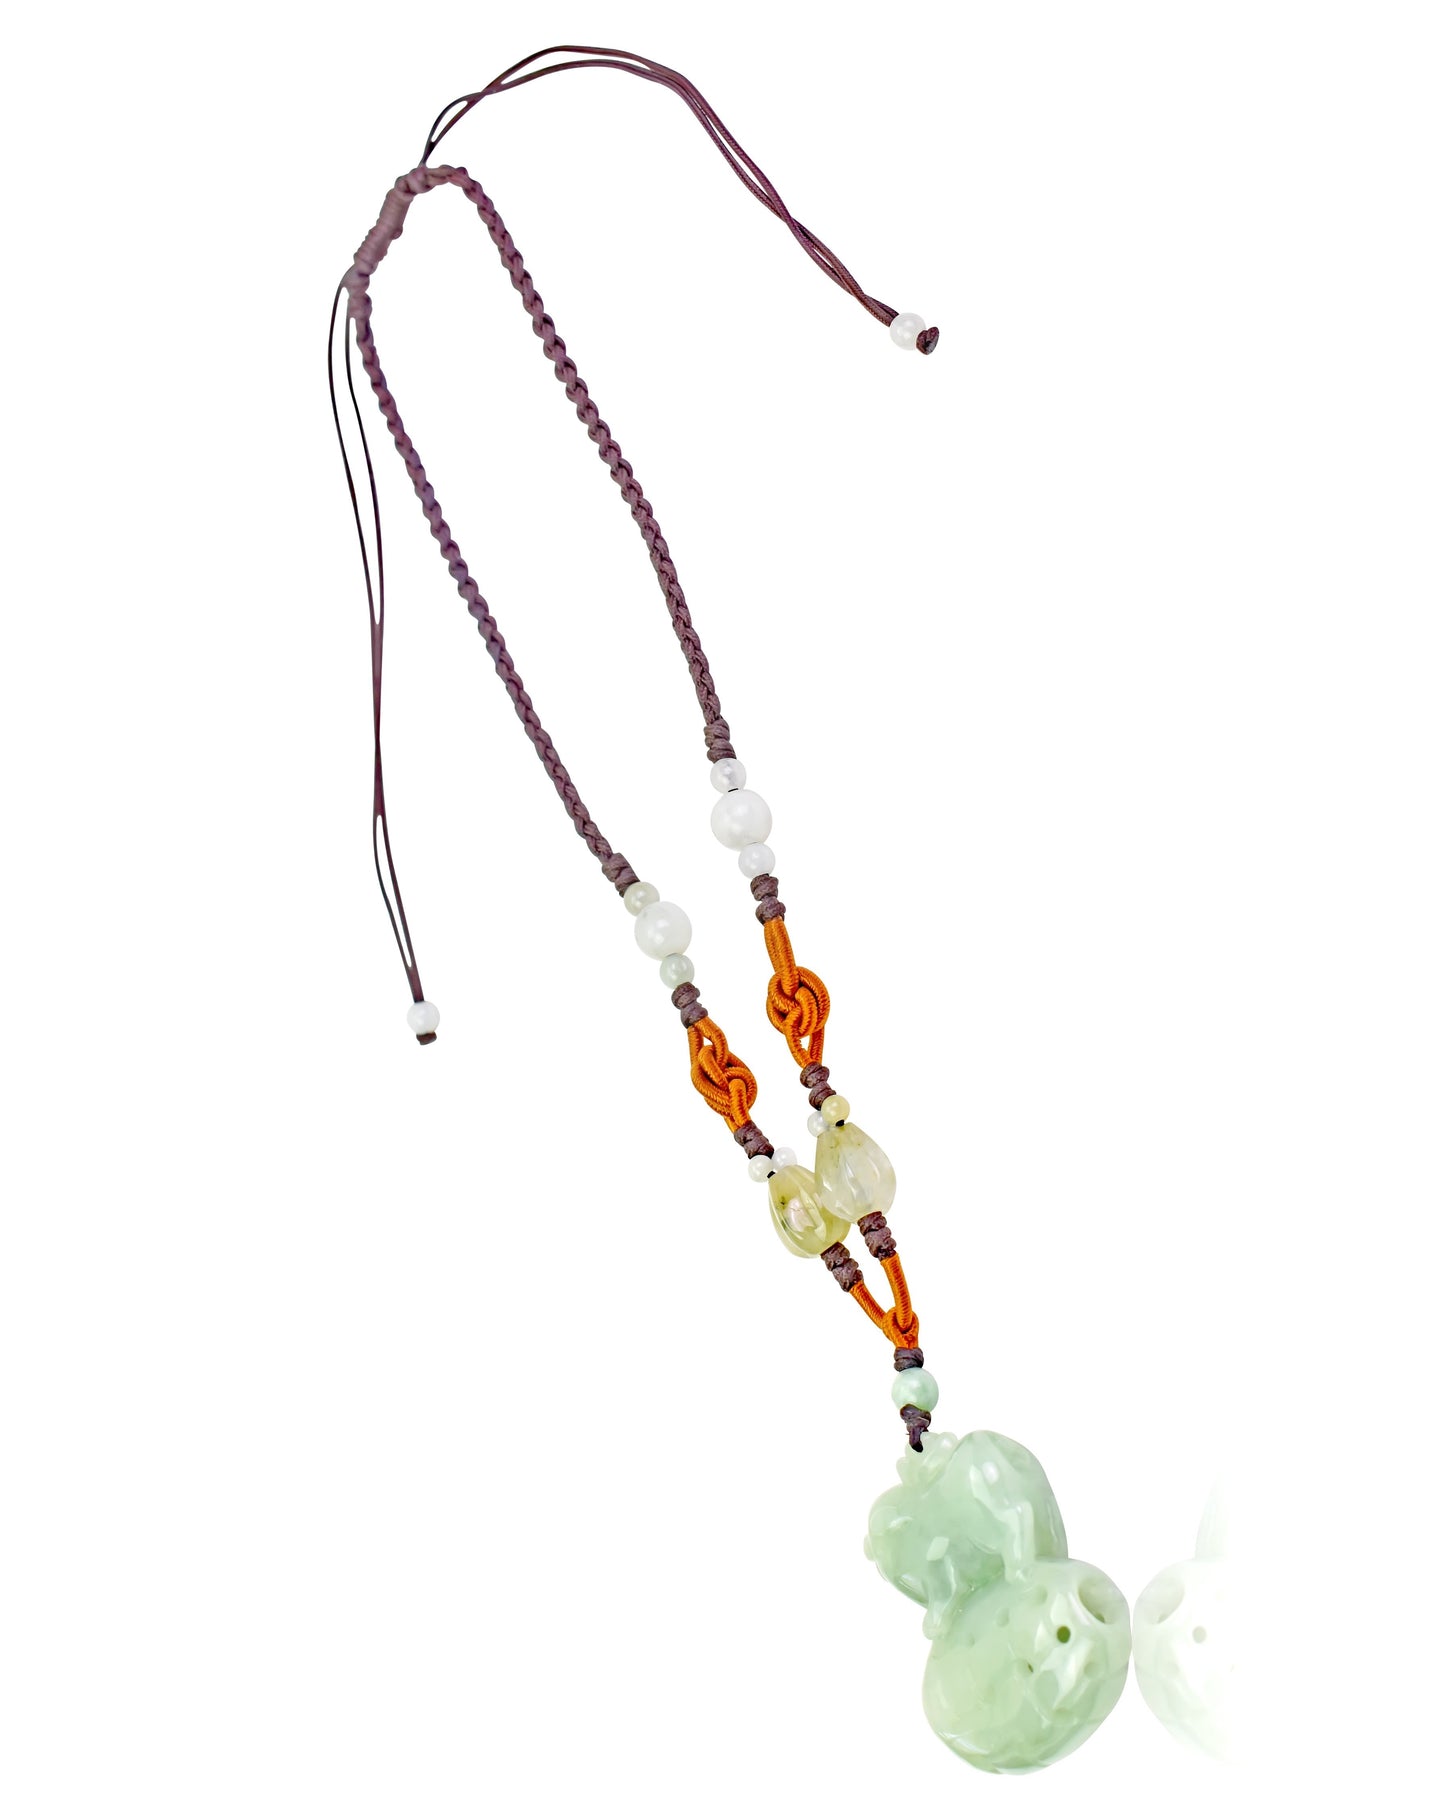 Attract Luck and Wealth with the Boar Chinese Zodiac Handmade Jade Necklace made with Brown Cord